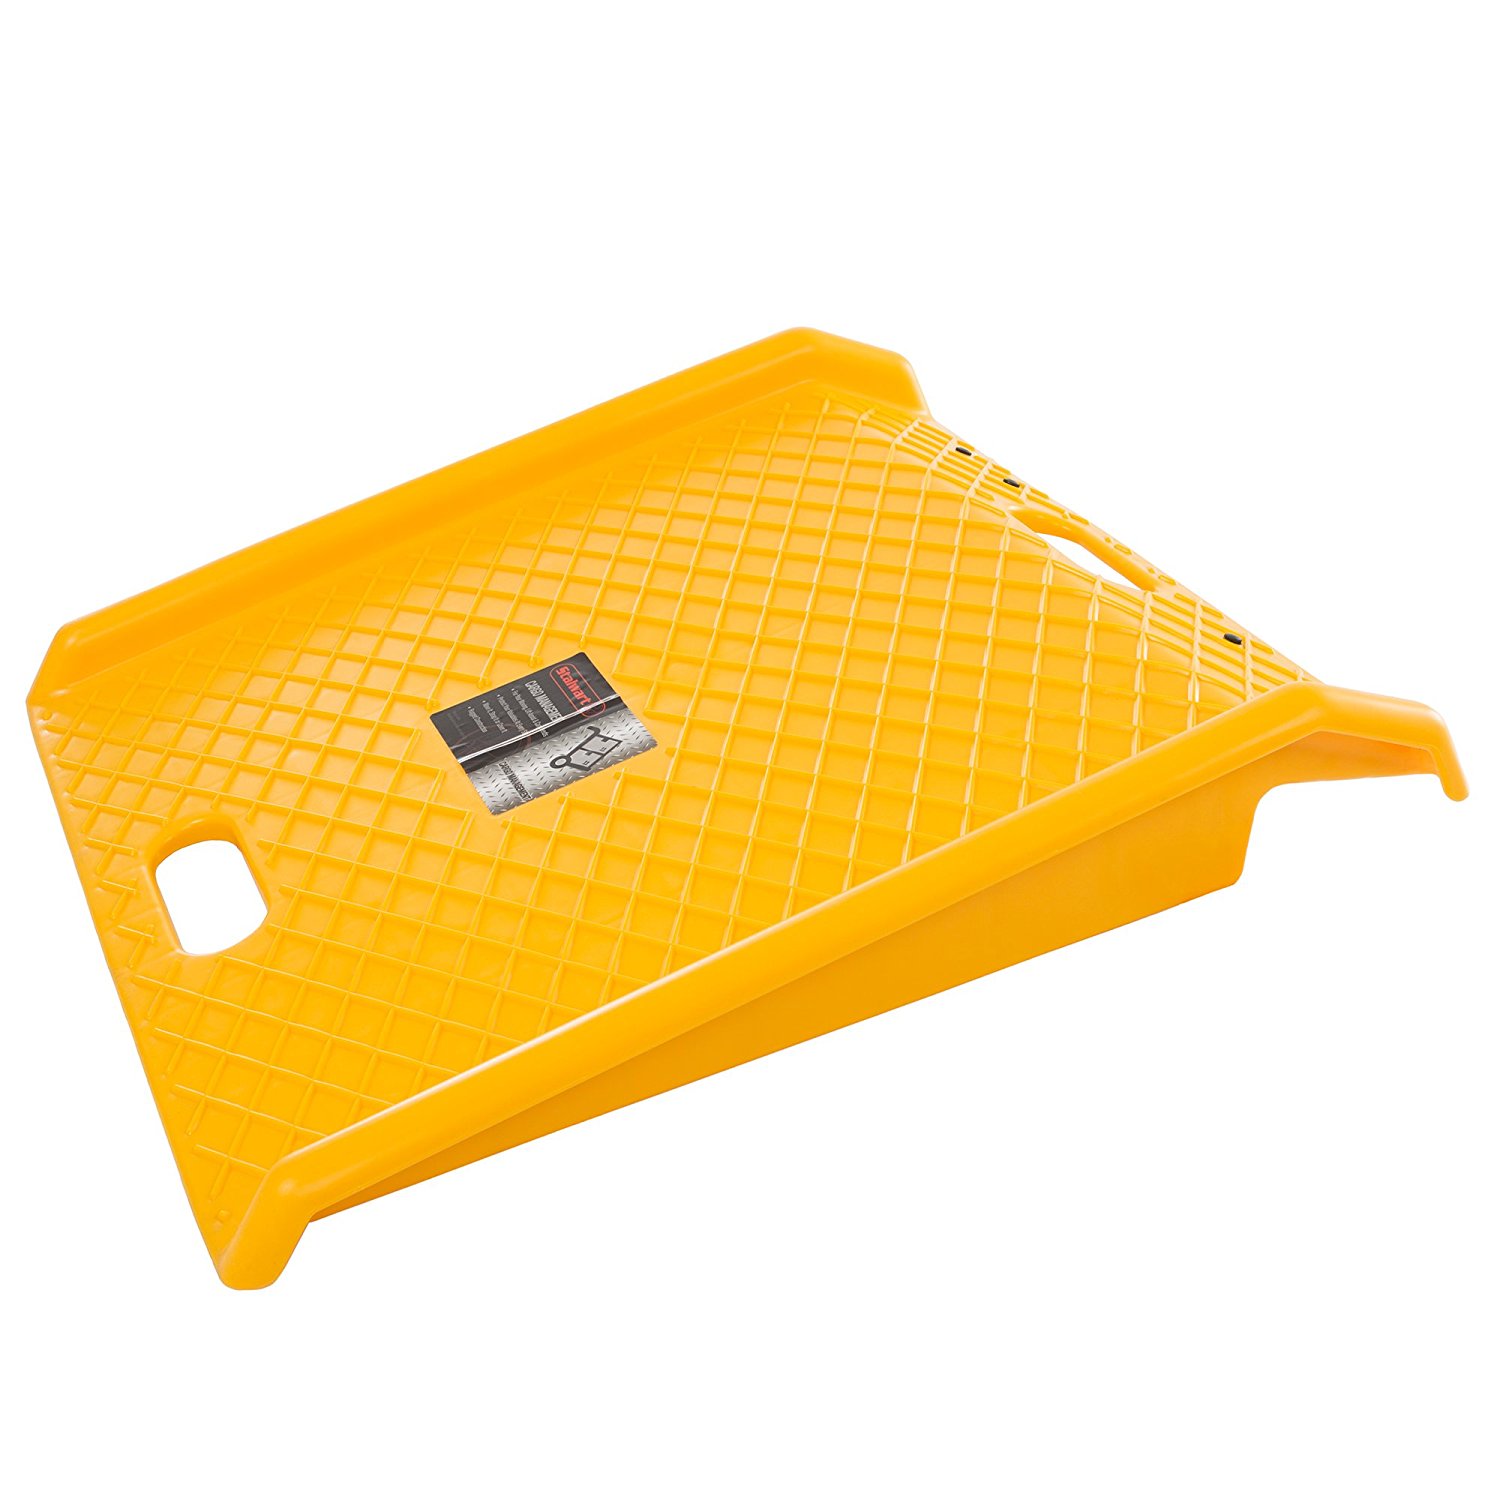 Curb Ramp, Heavy Duty Portable Poly Ramp With 1000 Lbs Weight Capacity By Stalwart (For Delivery, Hand Truck, Carts, Wheelchairs, Walkers) (Yellow)